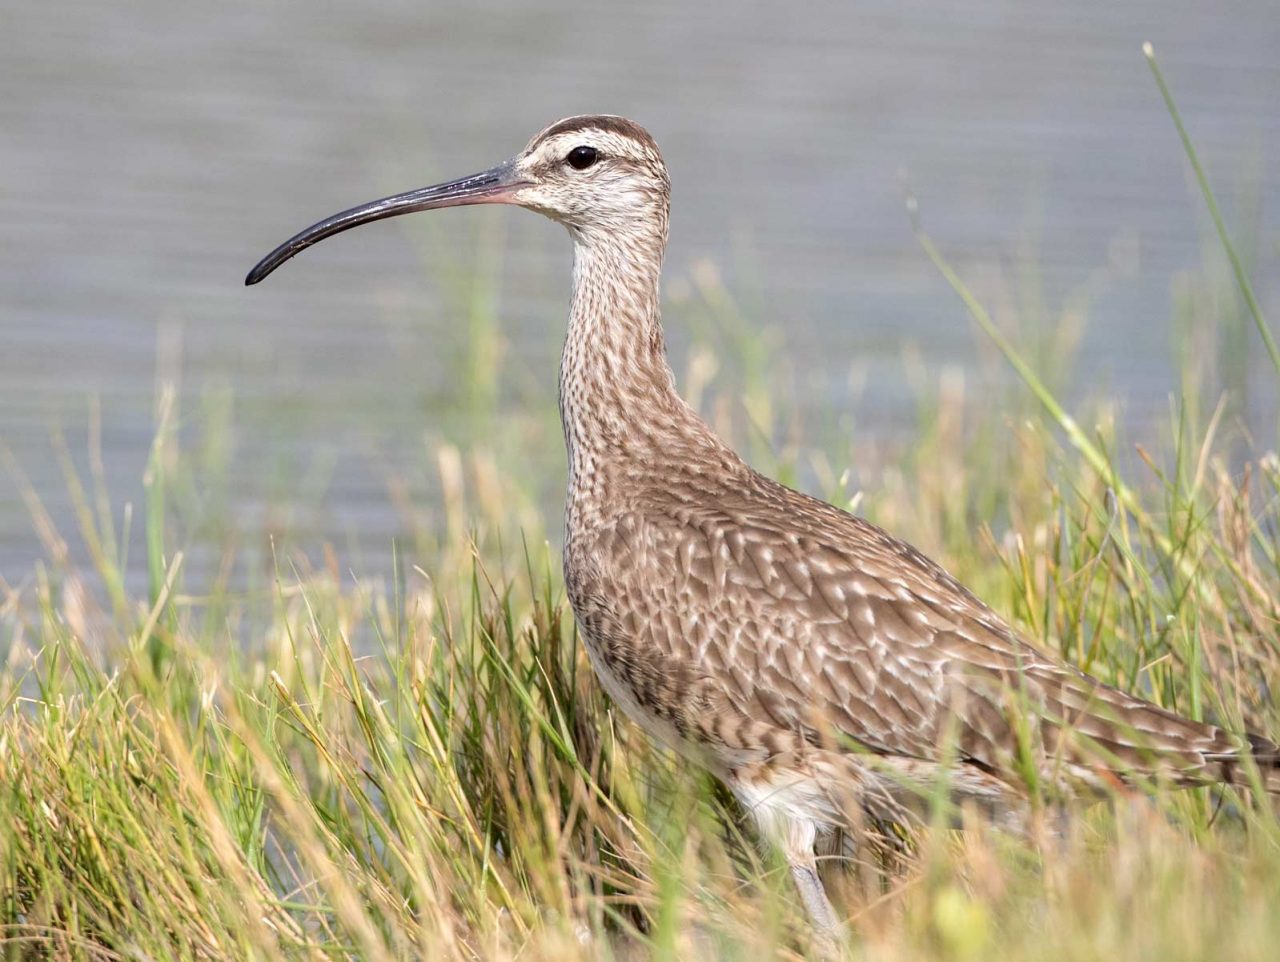 A Whimbrel spotted in Galveston. Photo by Ian Davies/Macaulay Library.